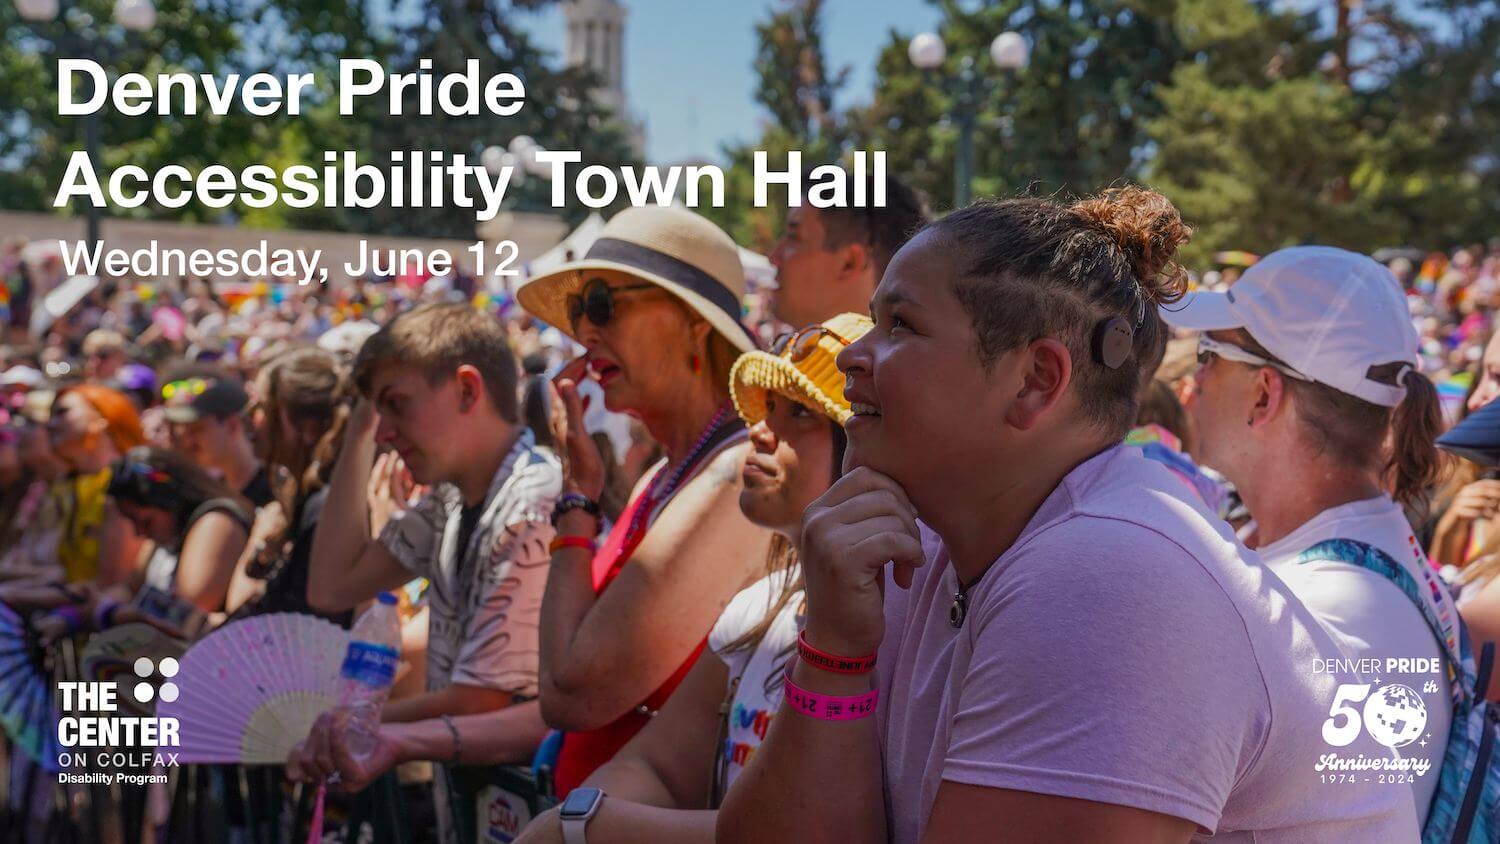 Denver Pride Accessibility Town Hall | Wednesday, June 12, 6:00 - 7:00 PM